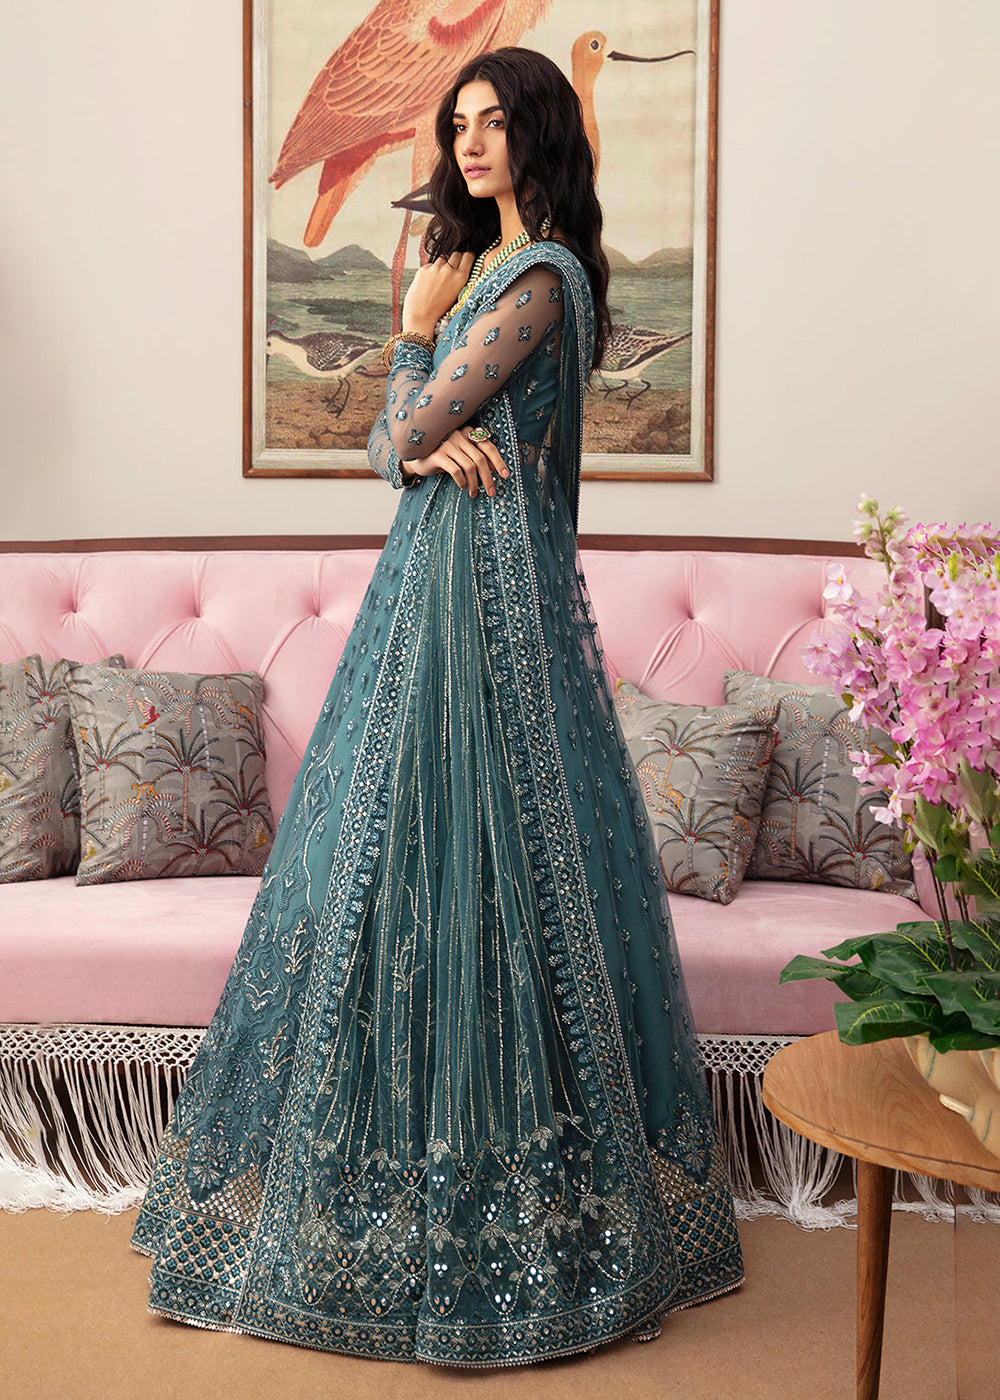 Buy Now The Whispers of Grandeur Luxury Formals '24 by Ayzel | LOBELIA Online at Empress Online in USA, UK, Canada & Worldwide at Empress Clothing.